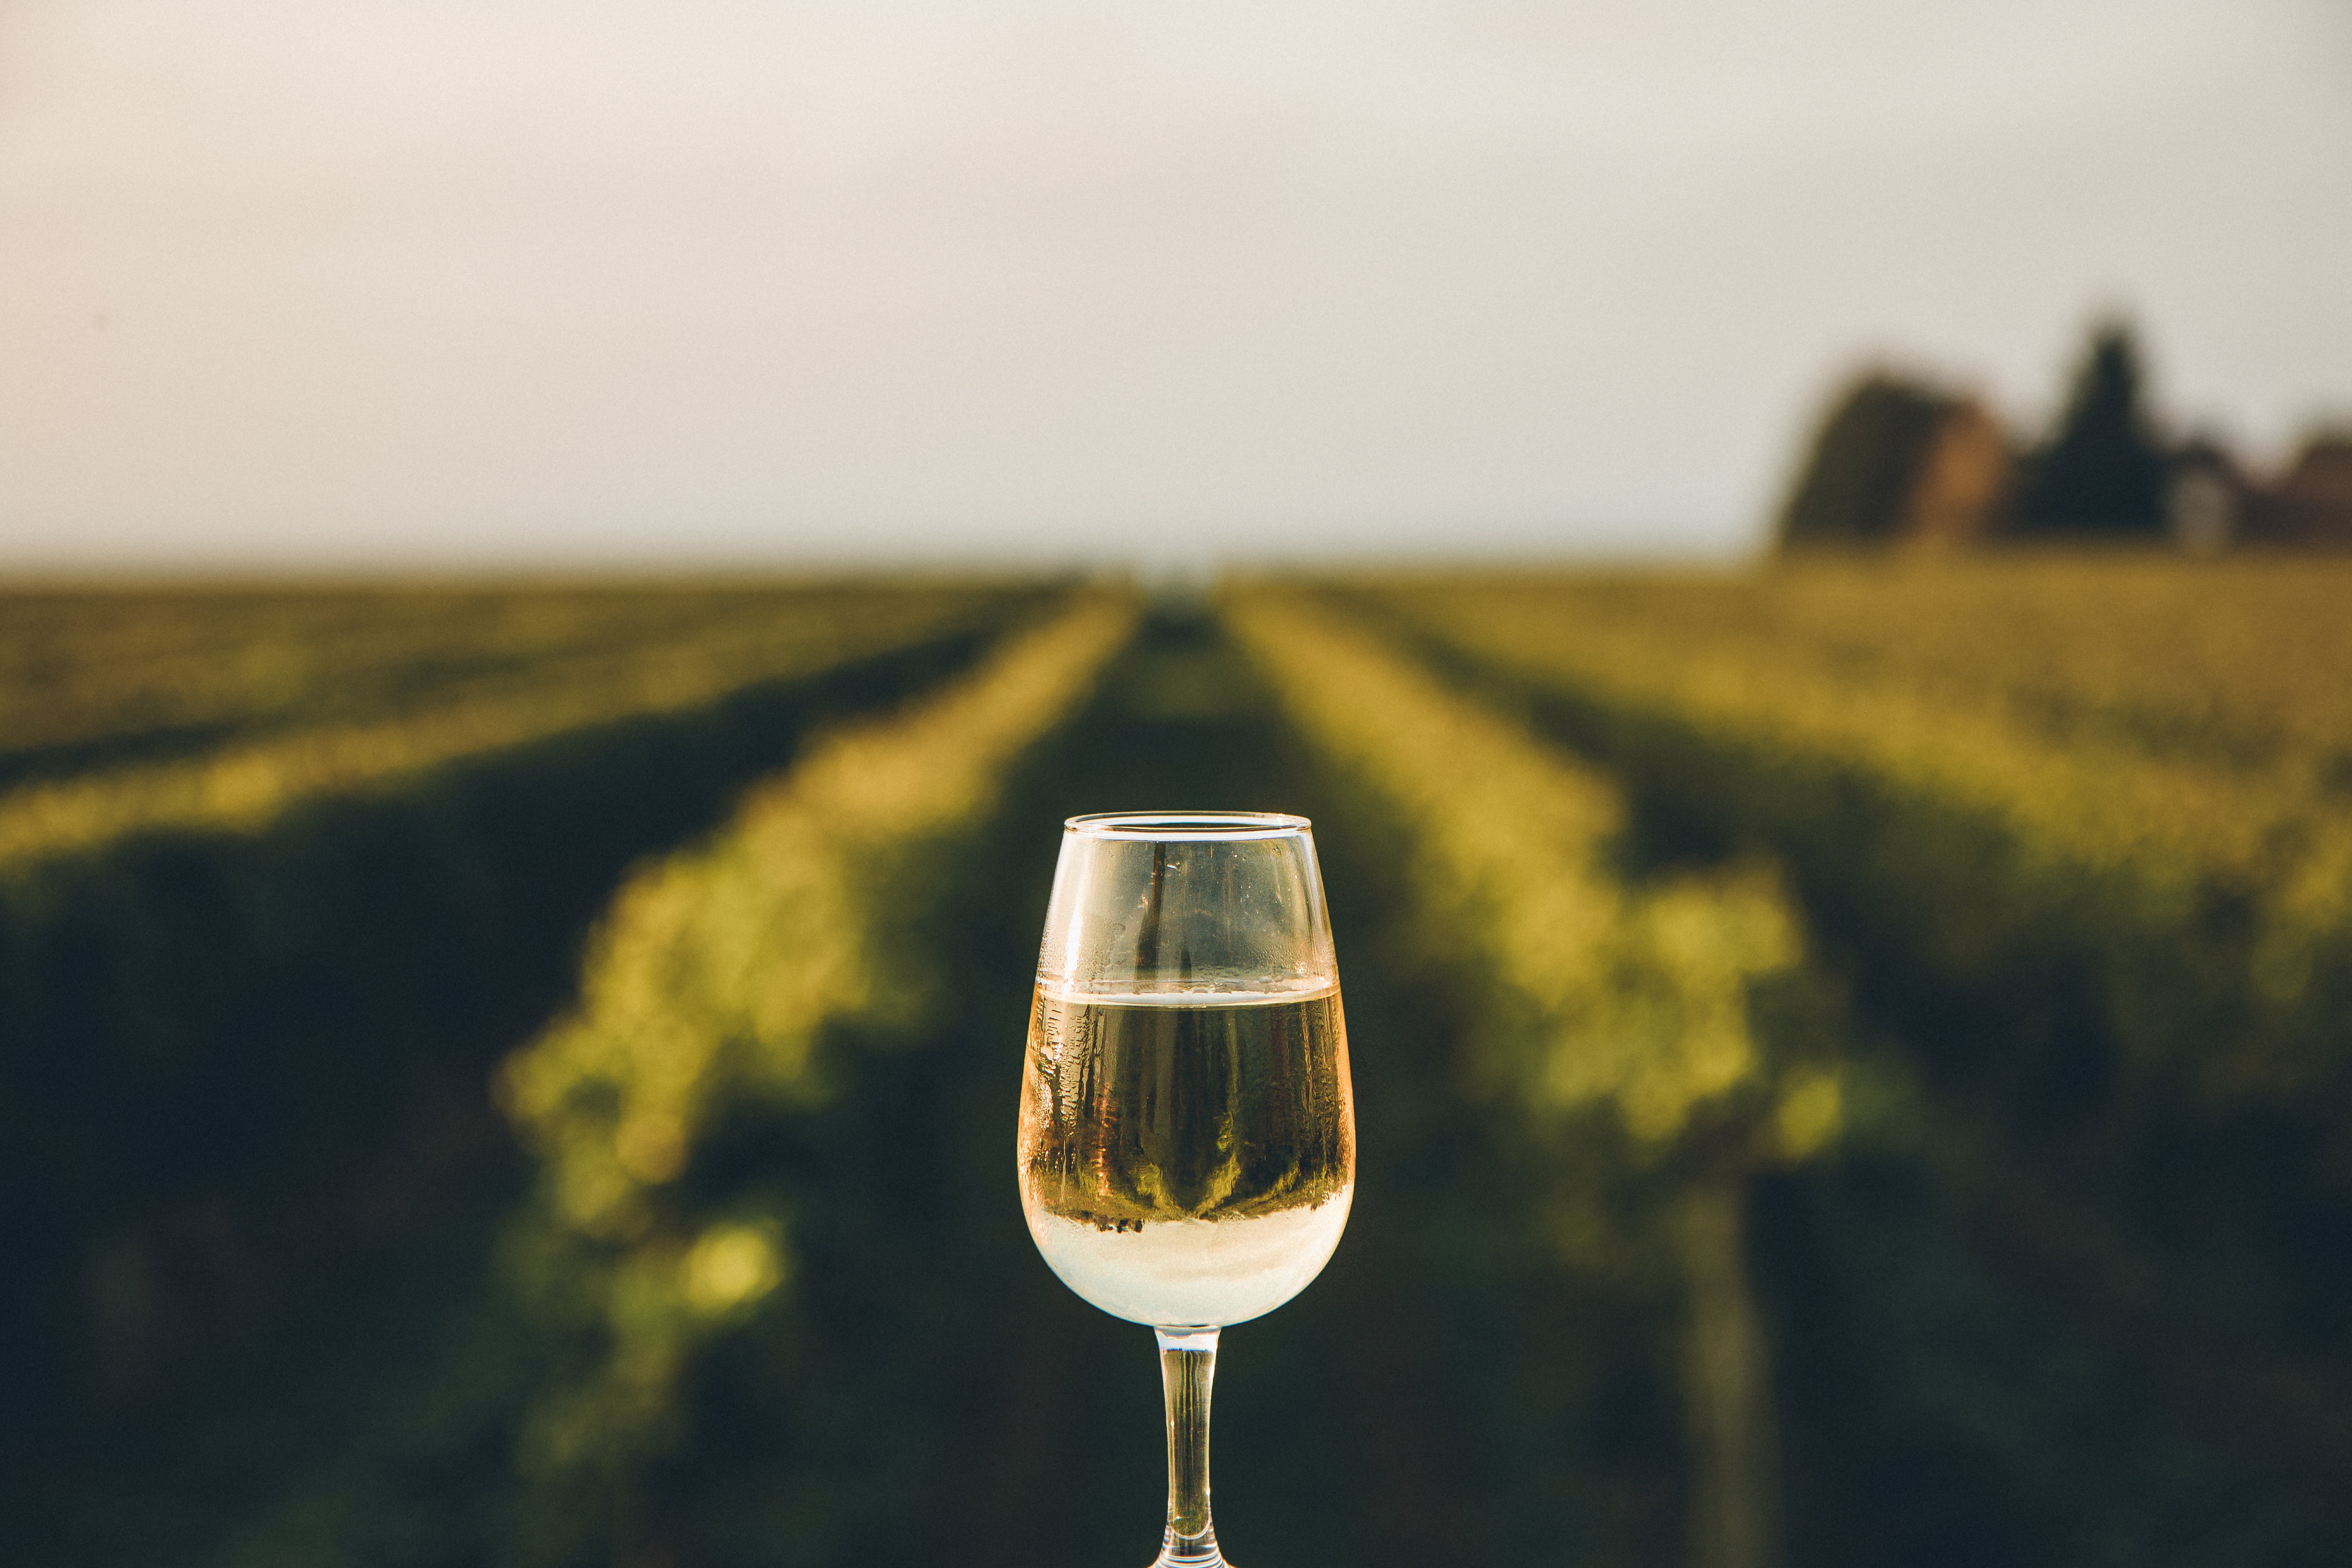 After the Niagra Falls helicopter ride you may well be in need of a glass of wine. If so, make it a rare dessert wine produced from the juice of naturally frozen grapes of the Niagara-on-the-Lake Vineyards